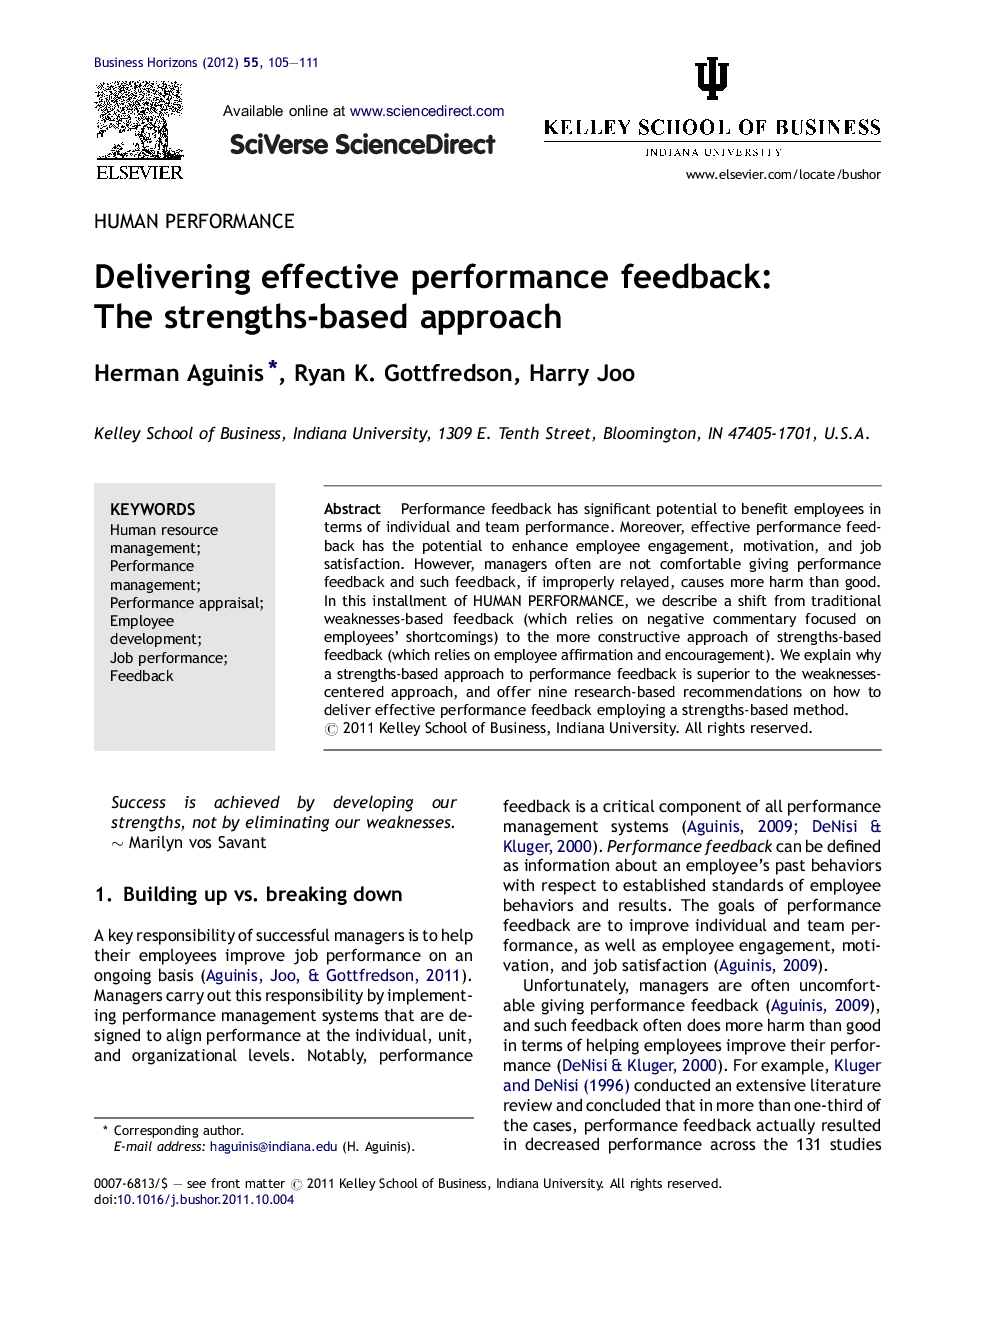 Delivering effective performance feedback: The strengths-based approach